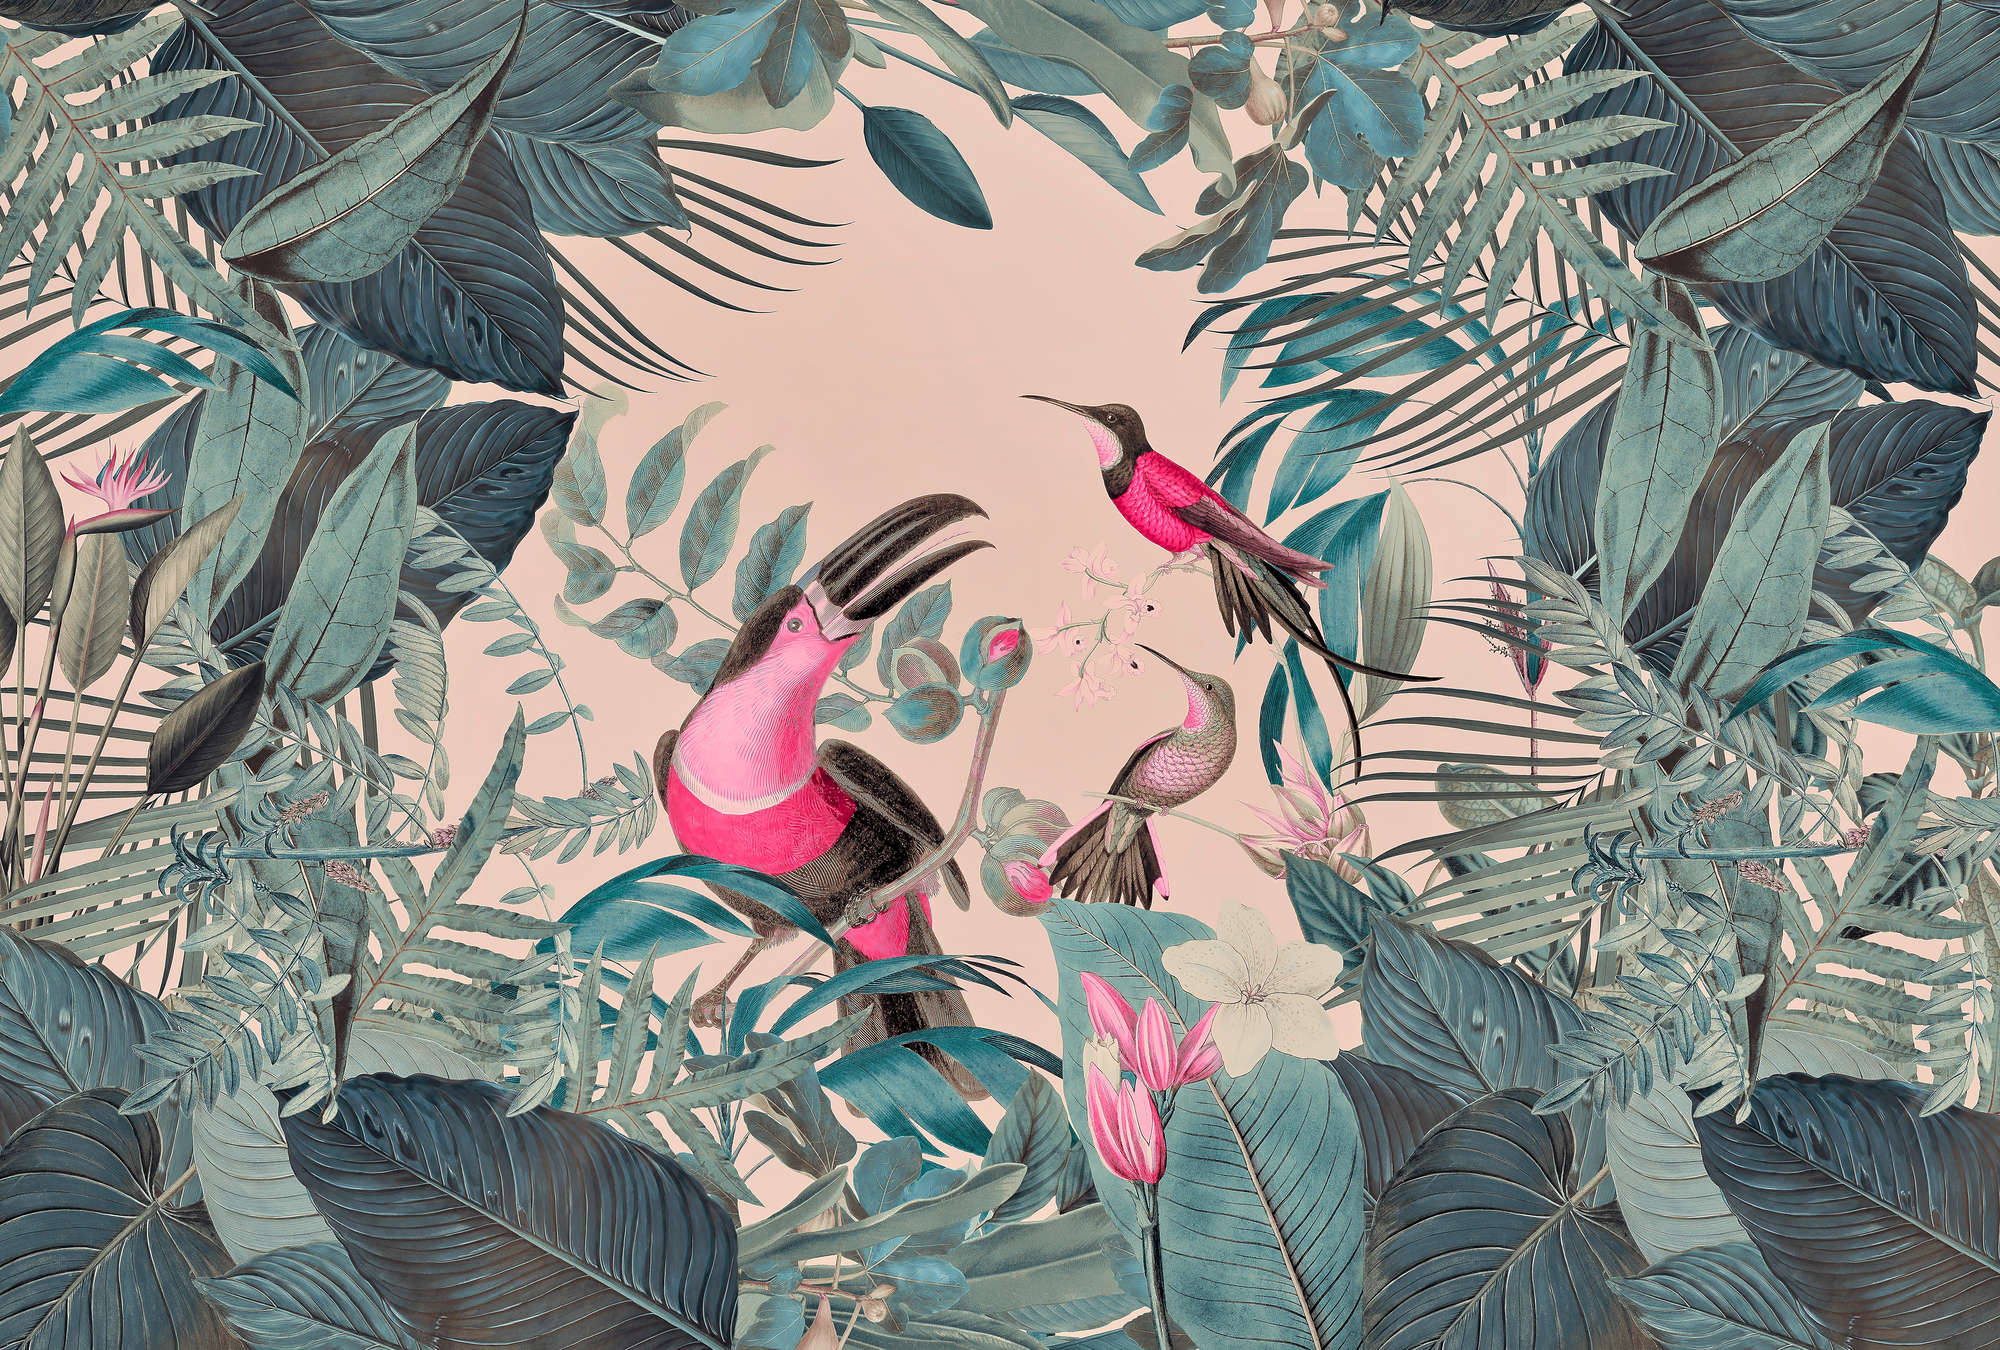             Tropical jungle mural with birds - green, pink
        